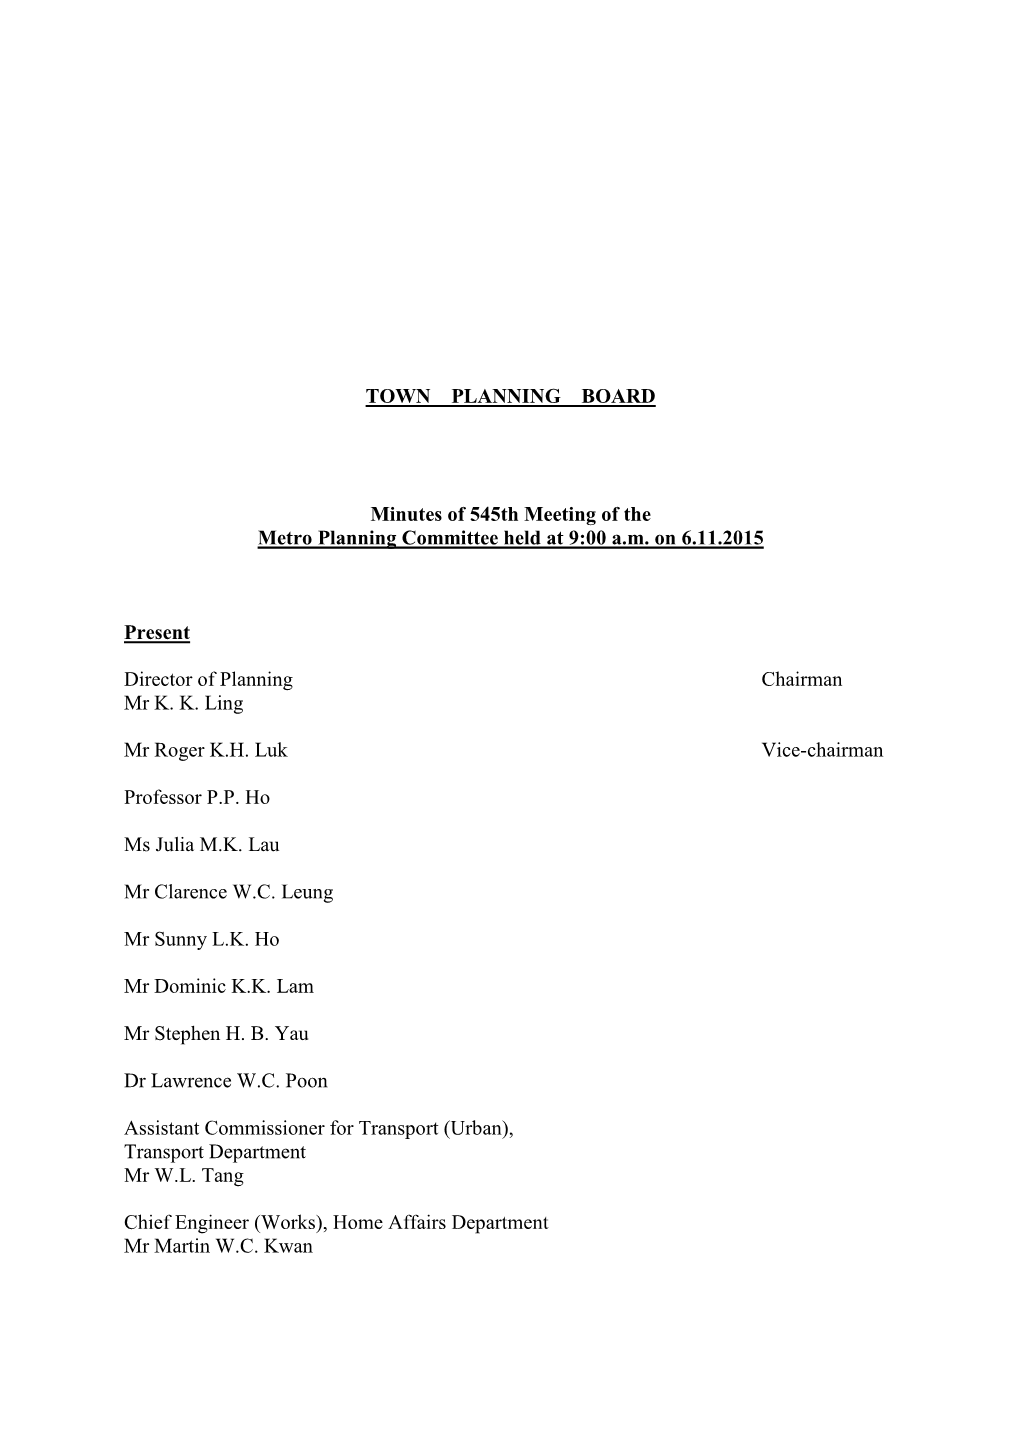 TOWN PLANNING BOARD Minutes of 545Th Meeting of the Metro